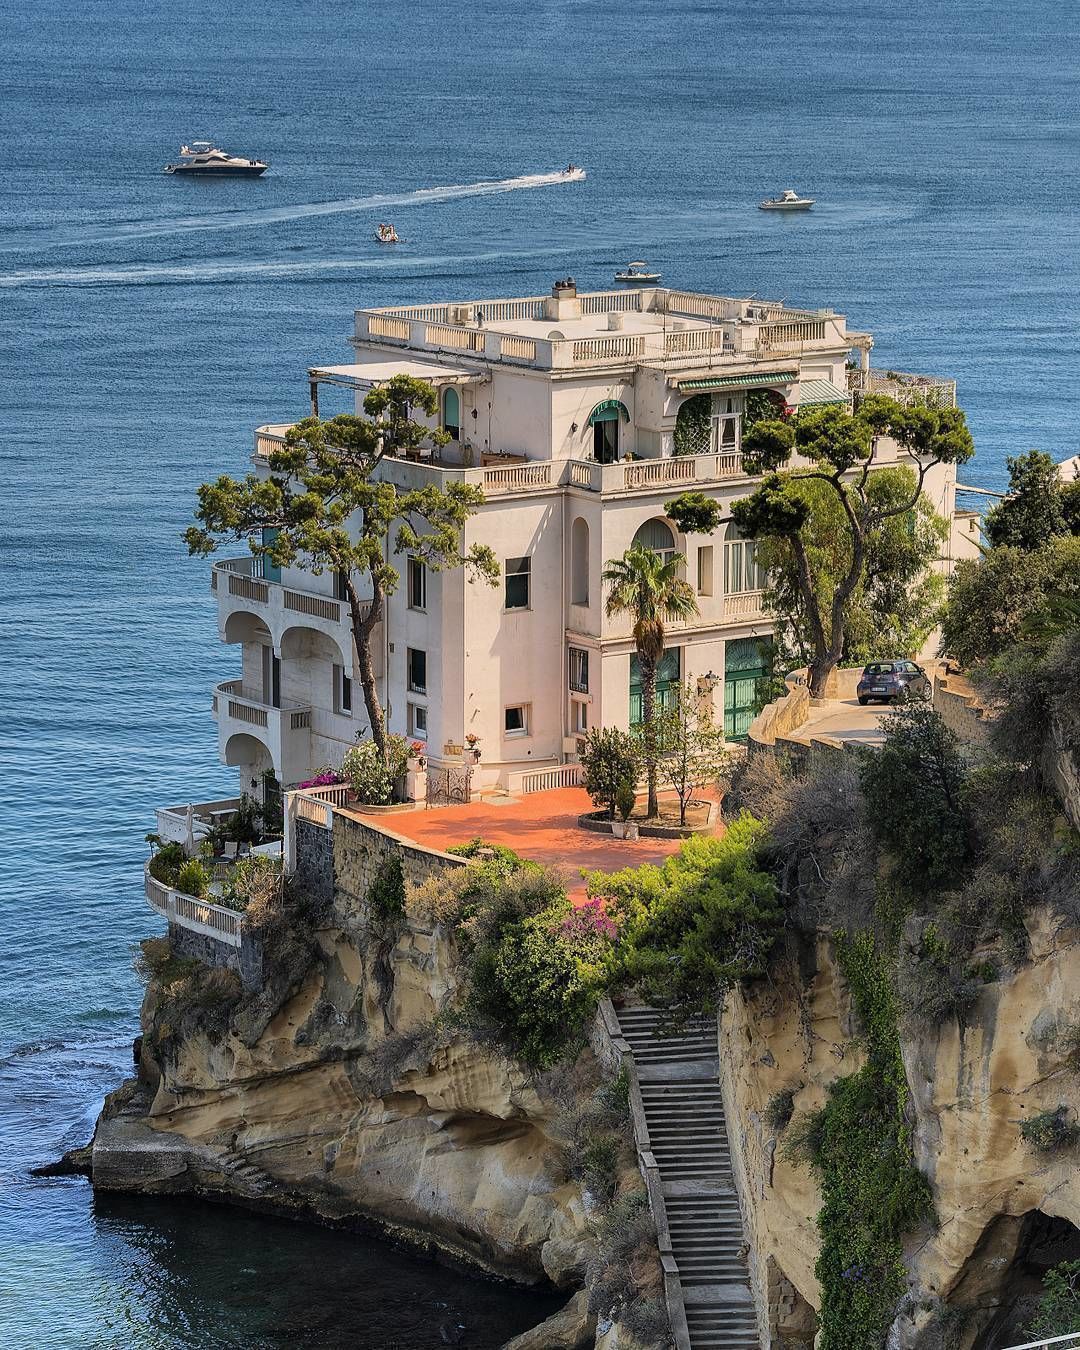 Looking for a stunning Villa Apartment with breathtaking views over the Bay of Naples?